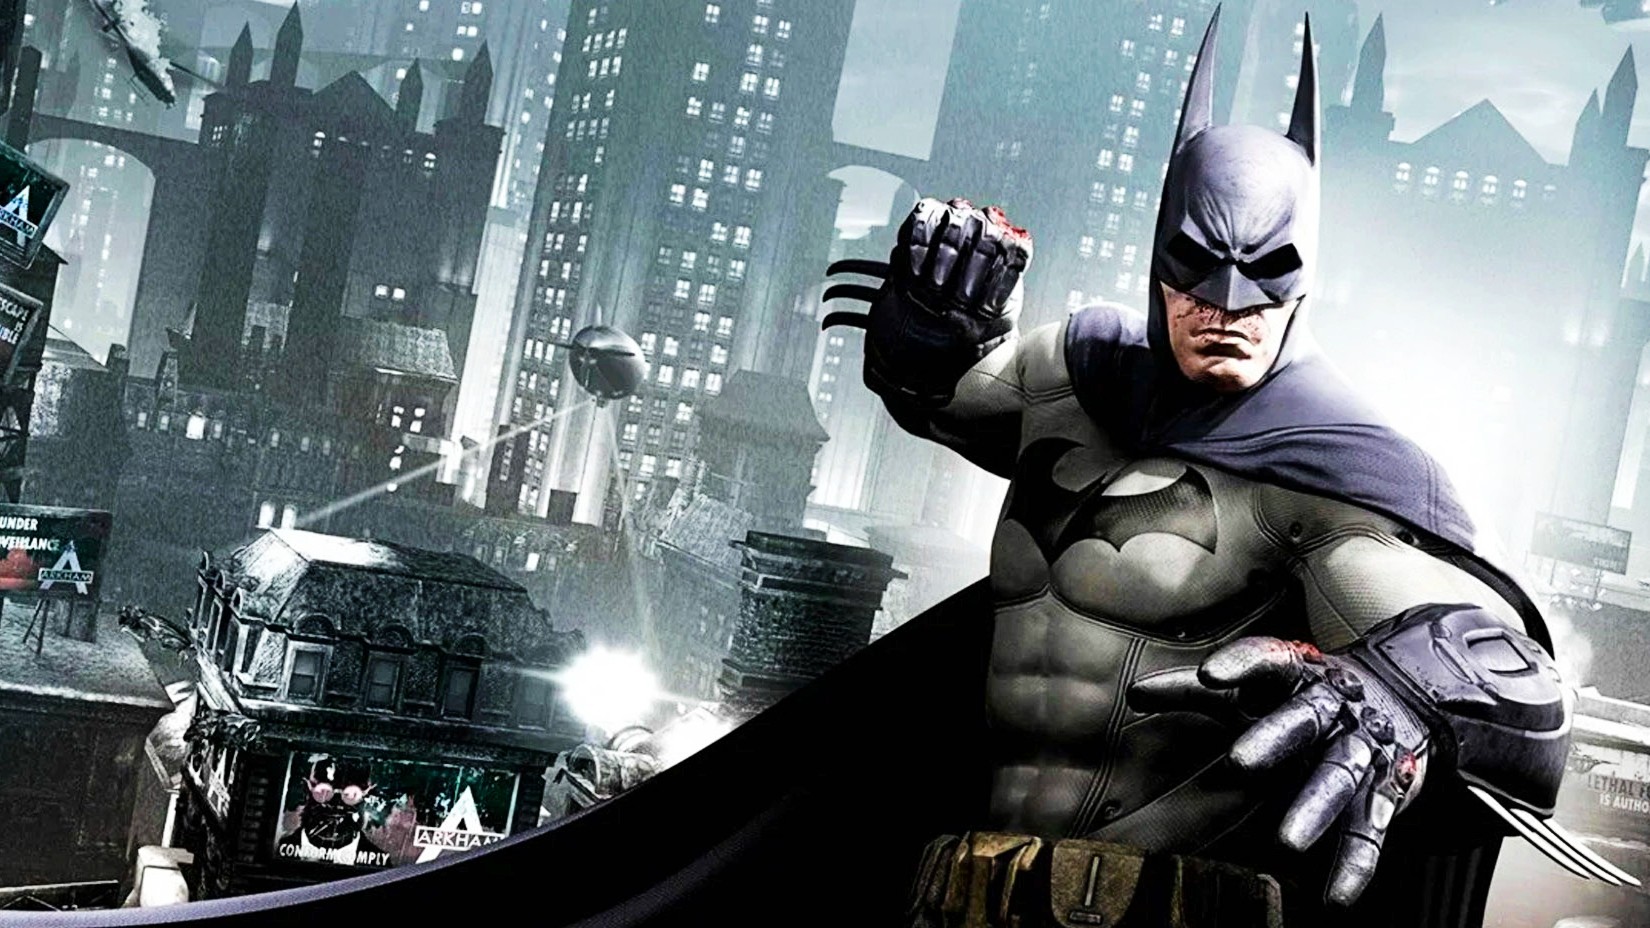 Why Batman's Arkham Series has one of Gaming's Greatest Combat Systems -  Art of the Level - IGN